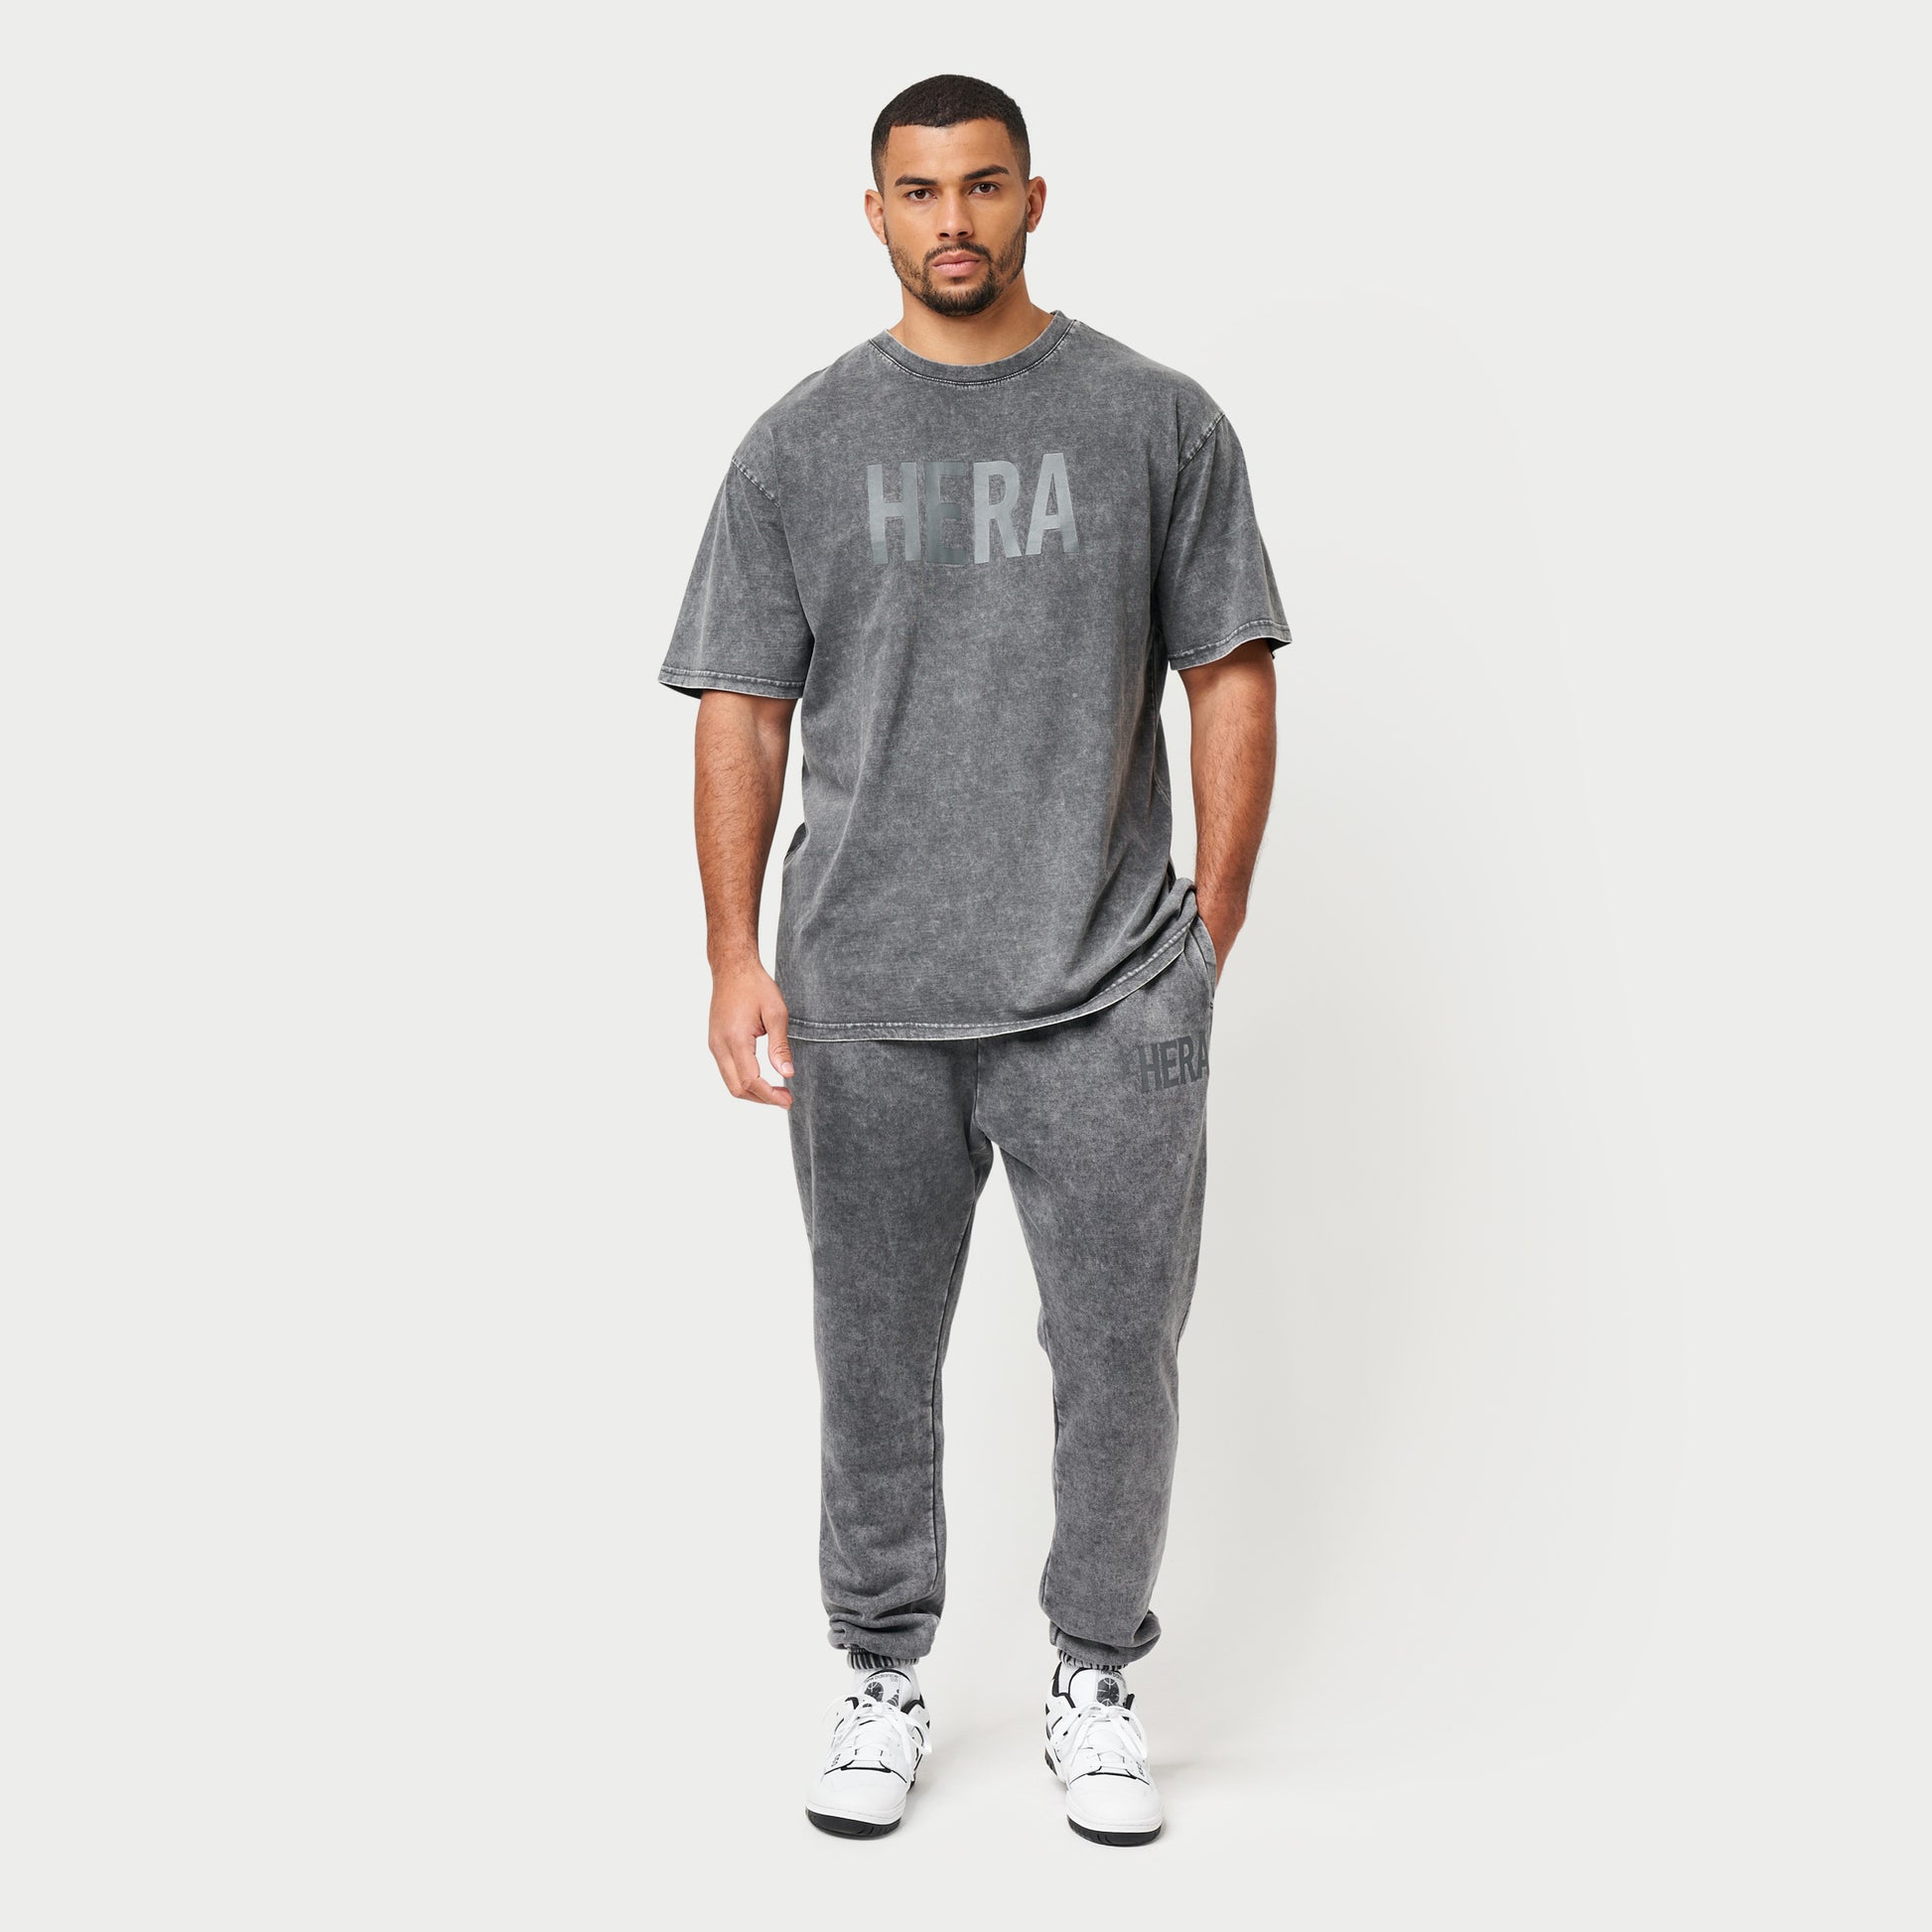 Relaxed Fit Vintage Wash Sweat Pant